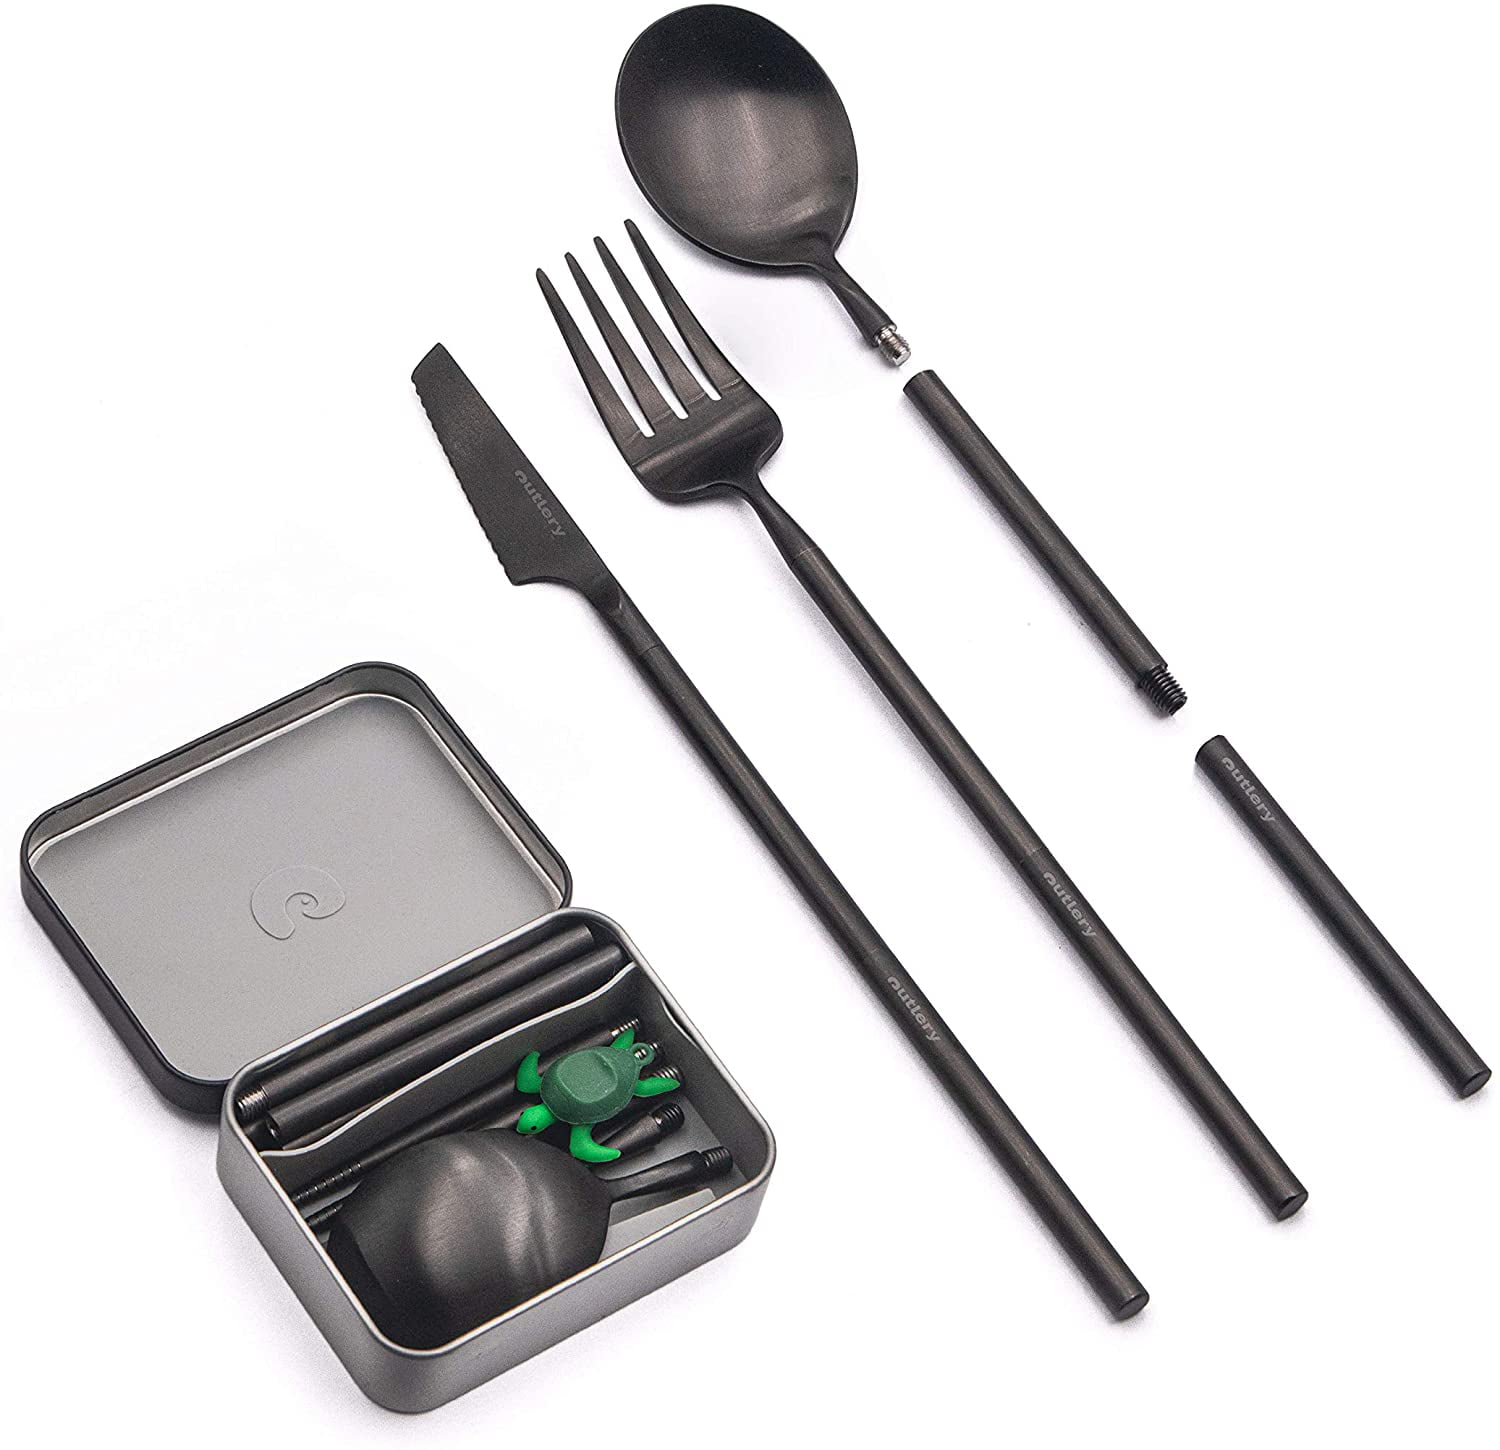 2-Person Stainless Steel Portable Eating Utensils Set with Case, Bottl – US  Survival Kits